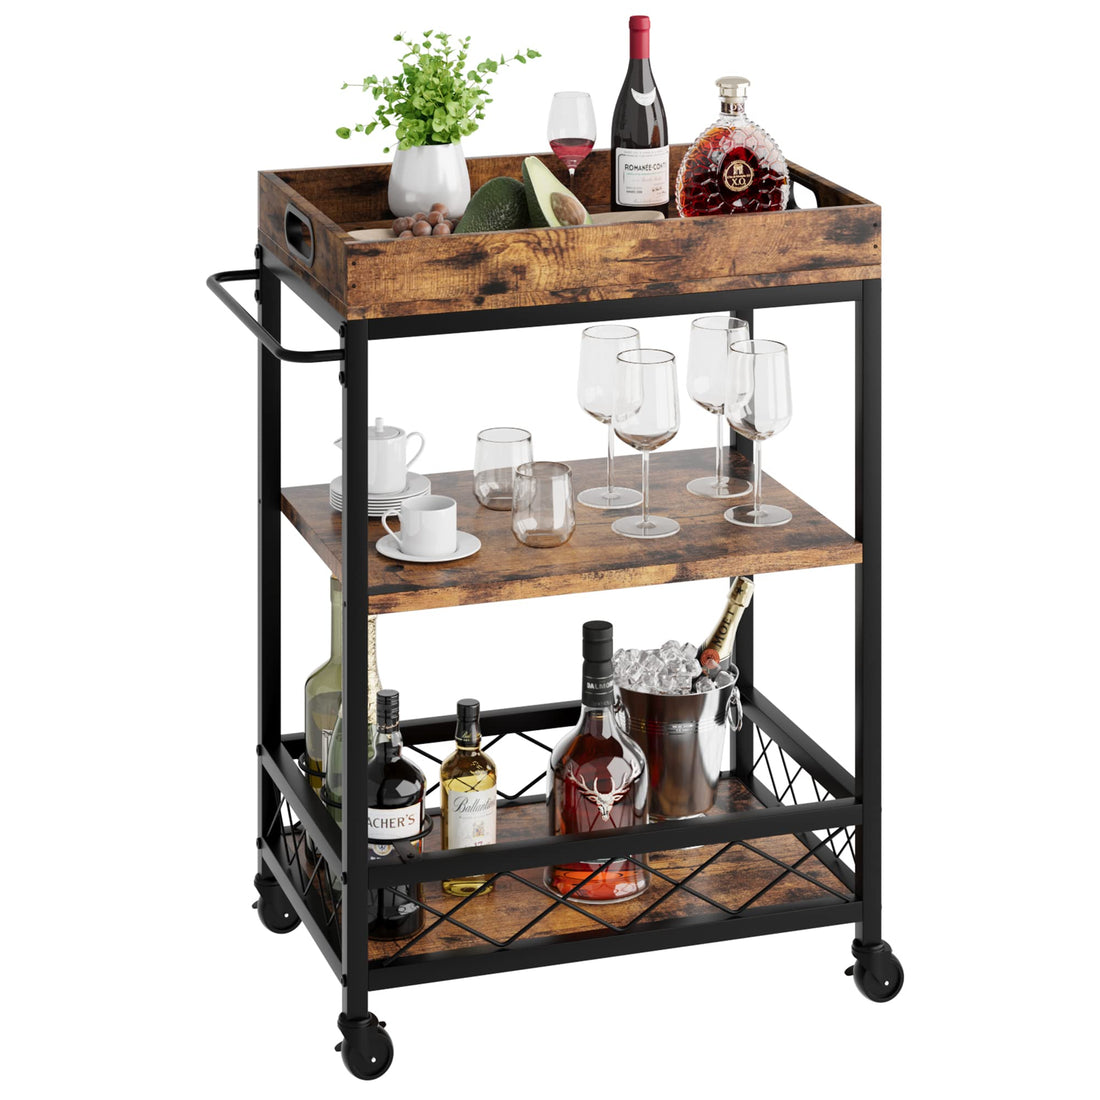 IDEALHOUSE Bar Carts for The Home, Bar Cart, Serving Cart with Wheels, 3 Tier Bar Cart with Wine Rack, Wheel Locks